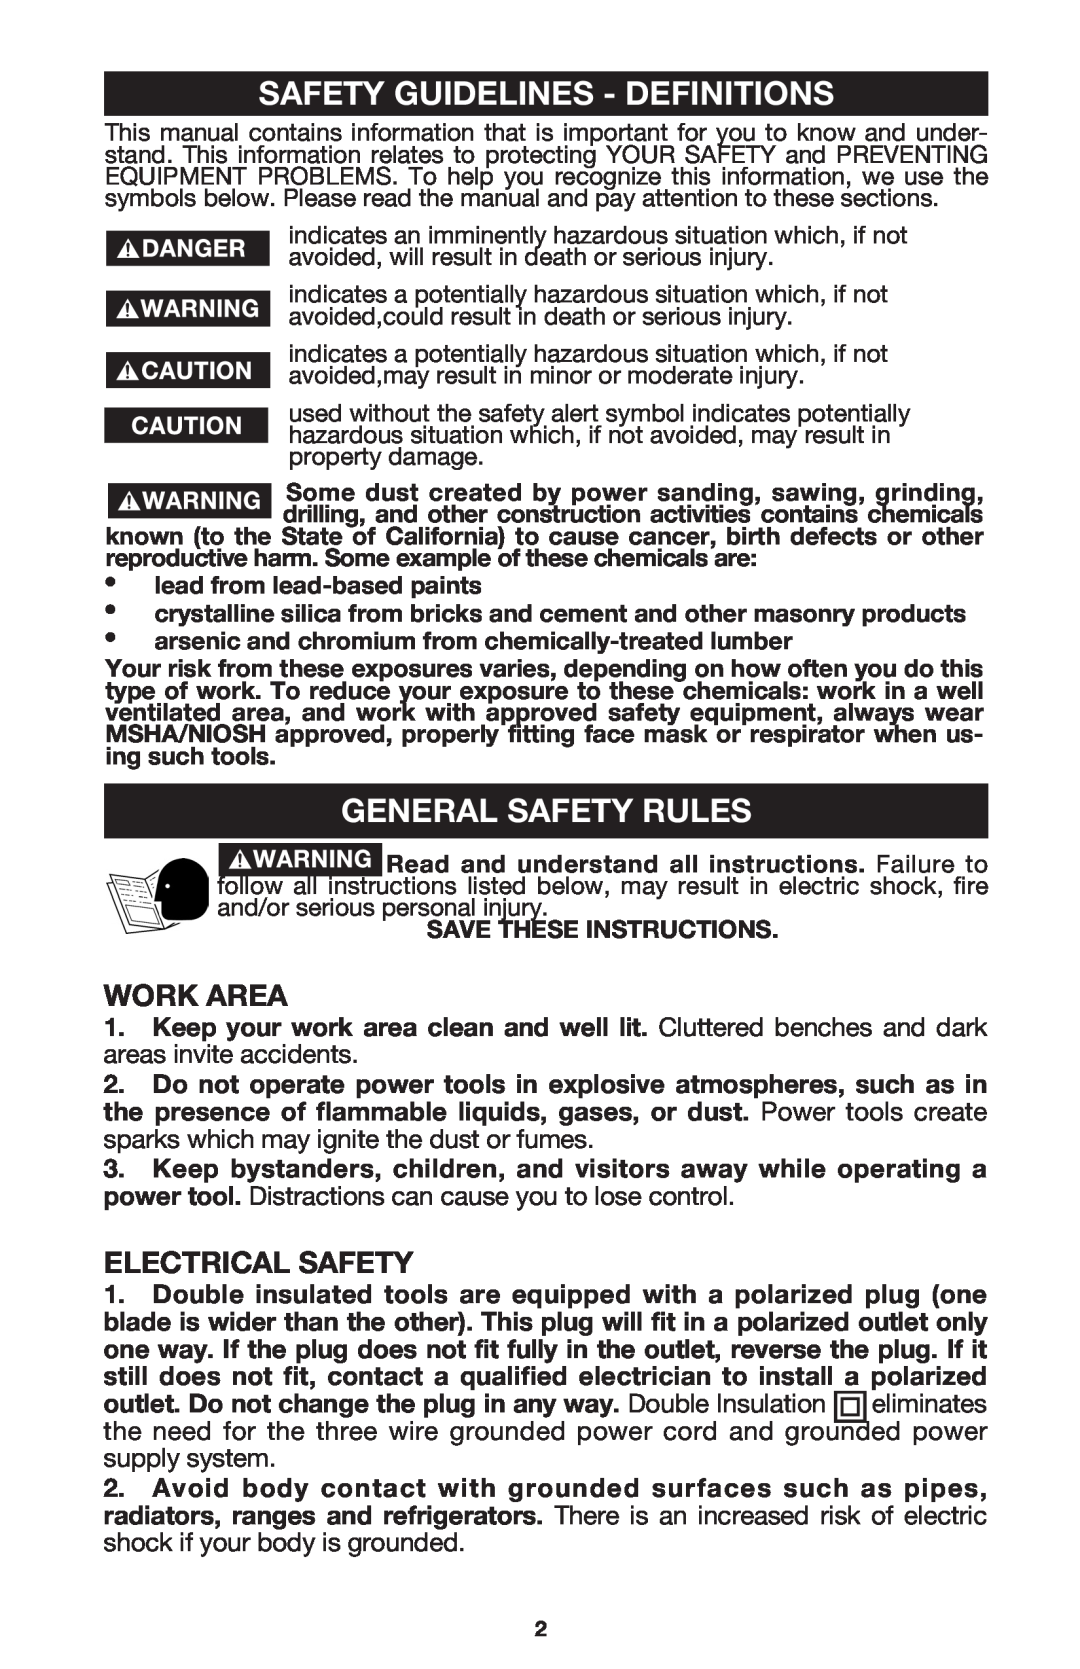 Porter-Cable 7536, 7537 Safety Guidelines - Definitions, General Safety Rules, Work Area, Electrical Safety 